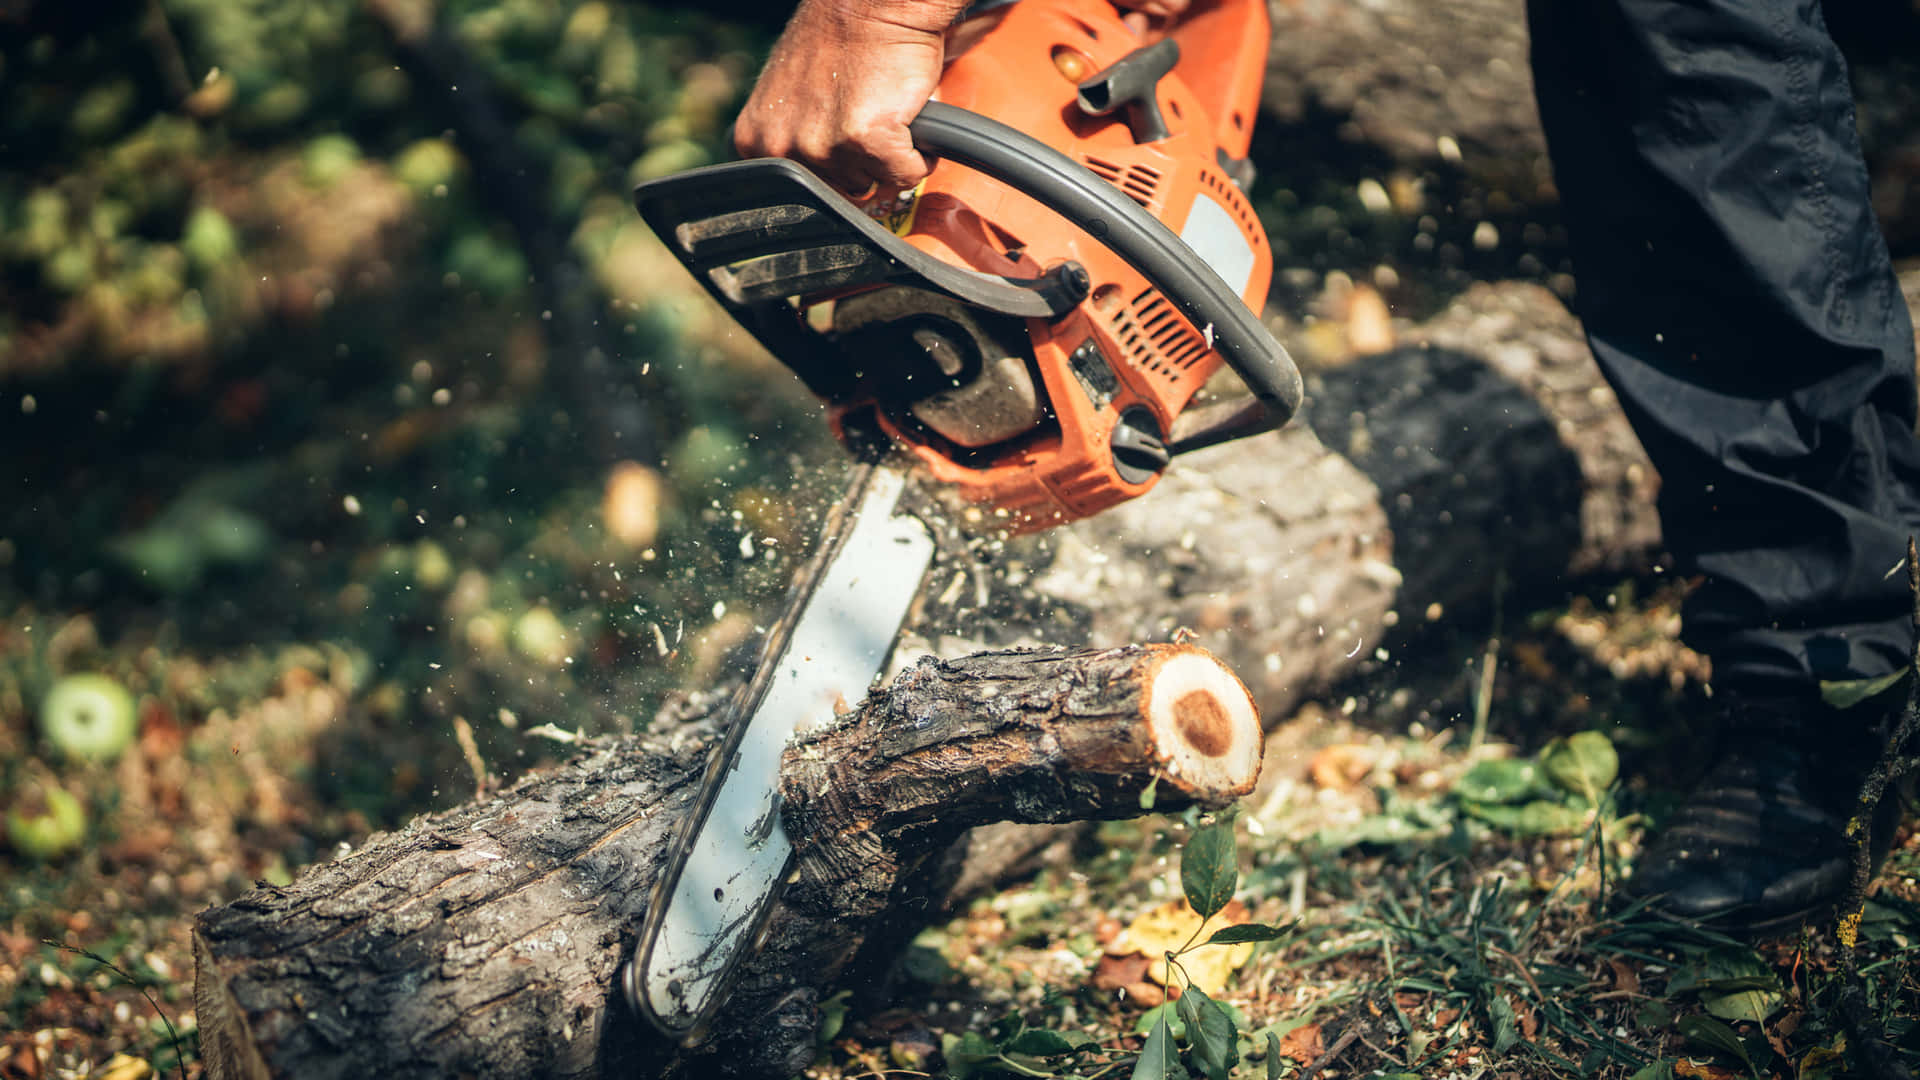 Powerful Chainsaw in Action